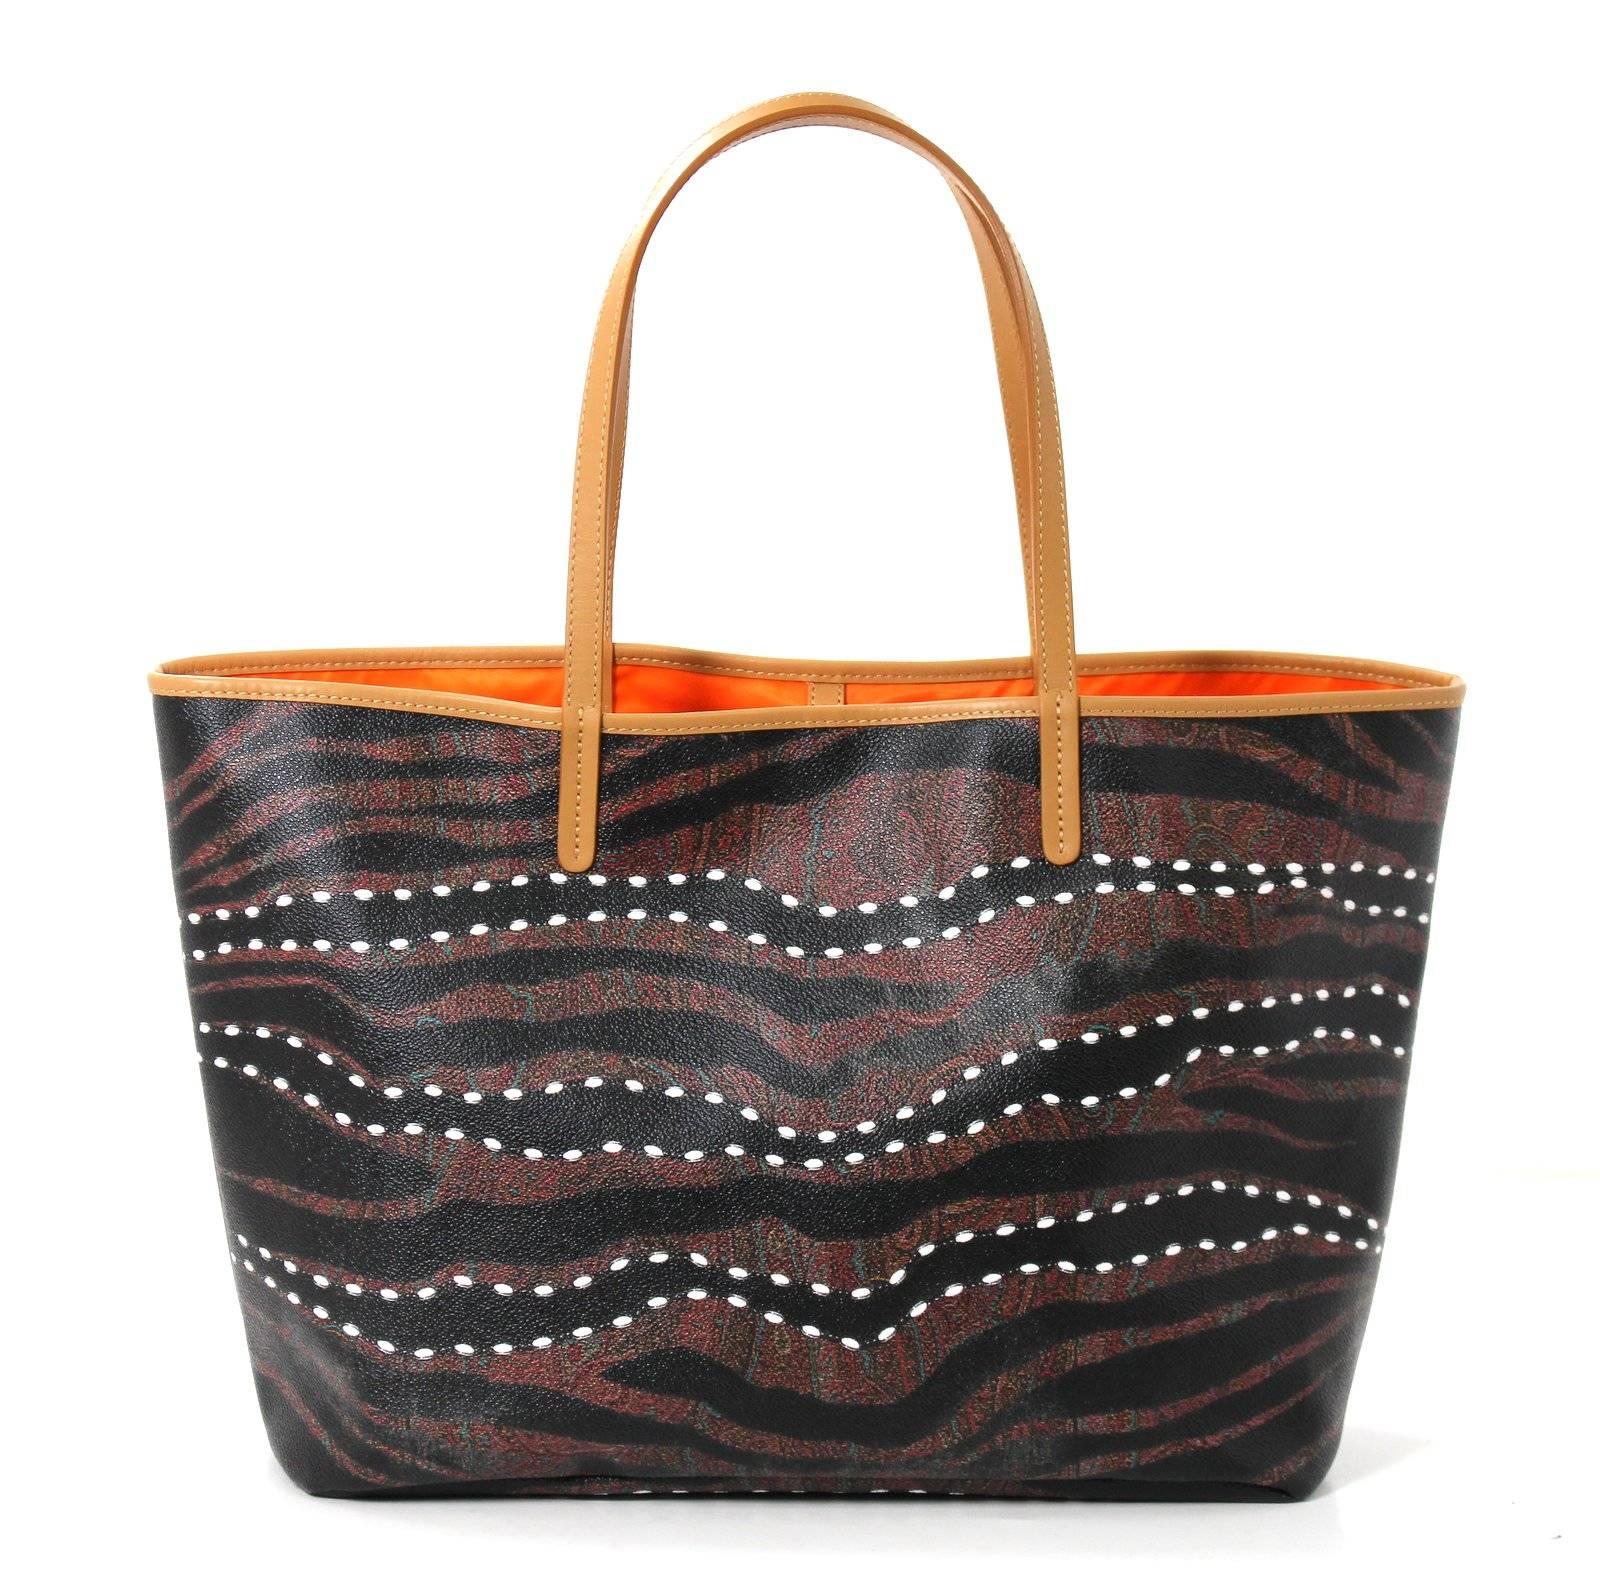 ETRO Paisley Tote- New, Never before Carried!!  Approximate retail $850.00
This ETRO tote is a classic silhouette in the medium size.  It features their signature paisley pattern with an overlay of black and white wavy dot striping that adds an